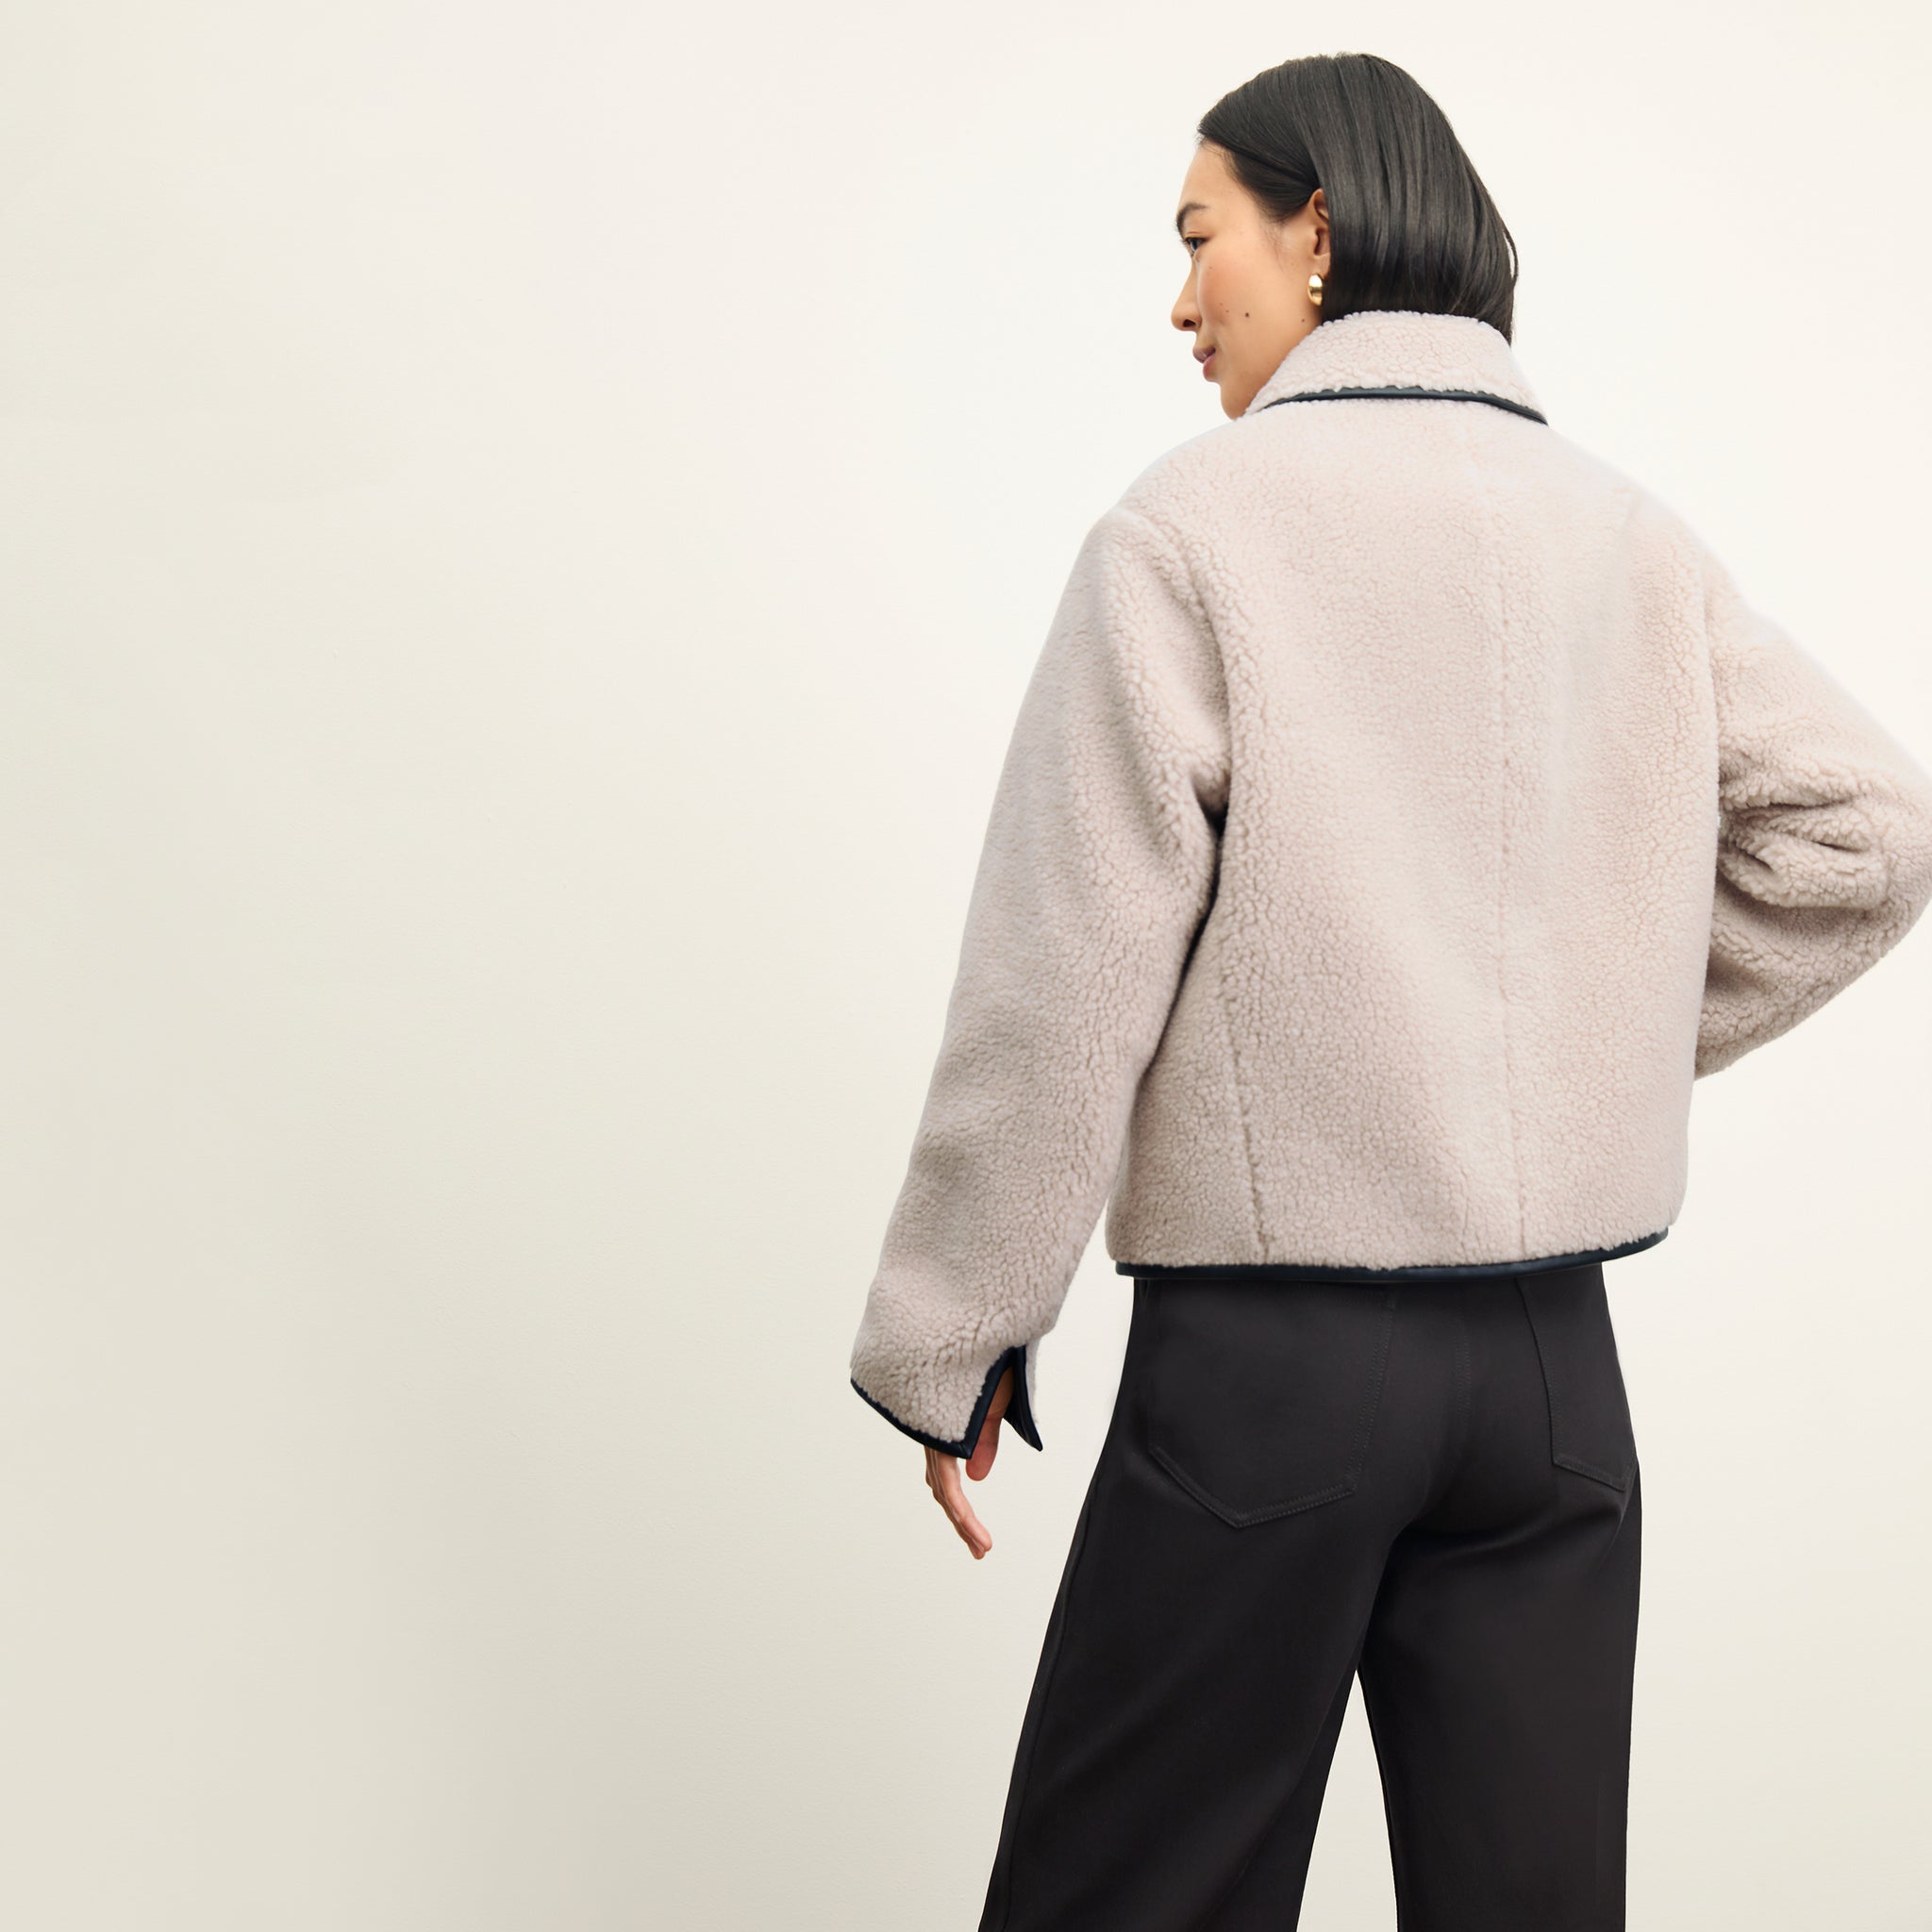 back image of a woman wearing the eli jacket in travertine